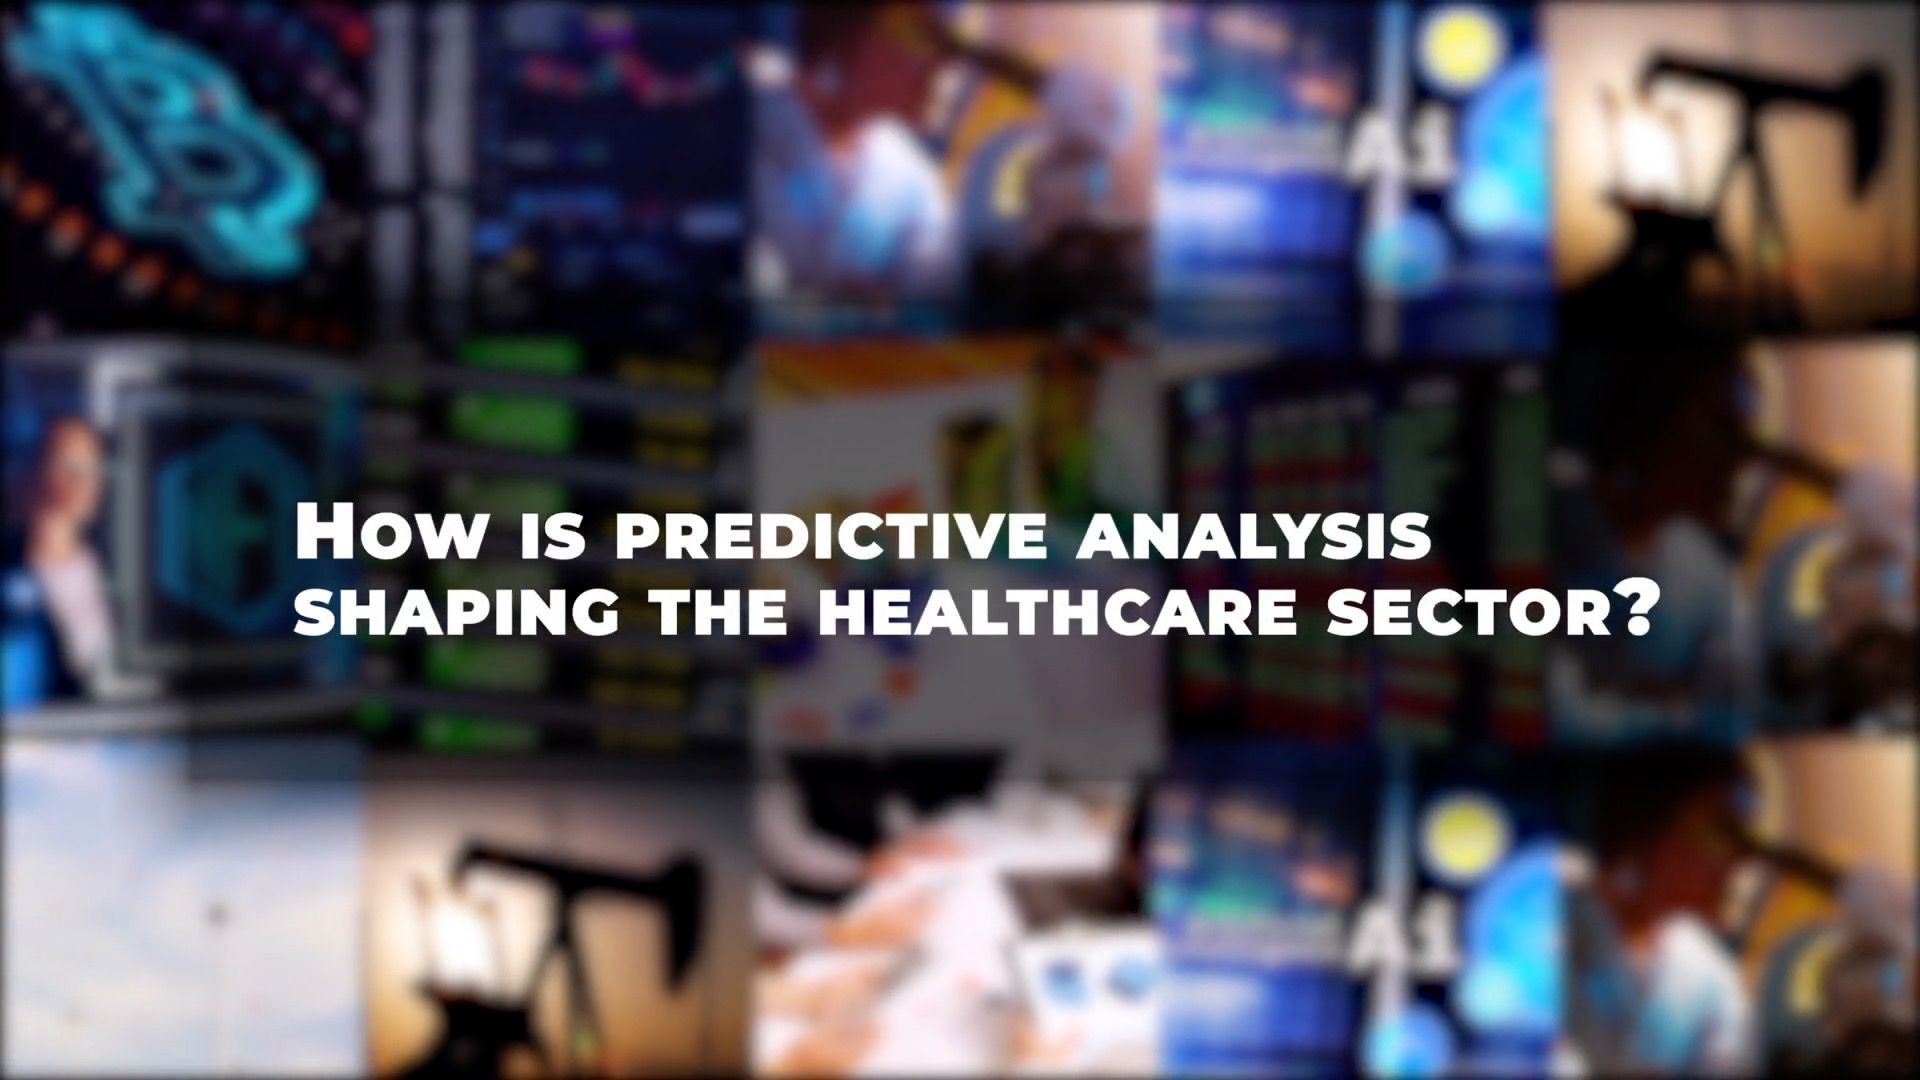 How is predictive analysis shaping the healthcare sector? video poster